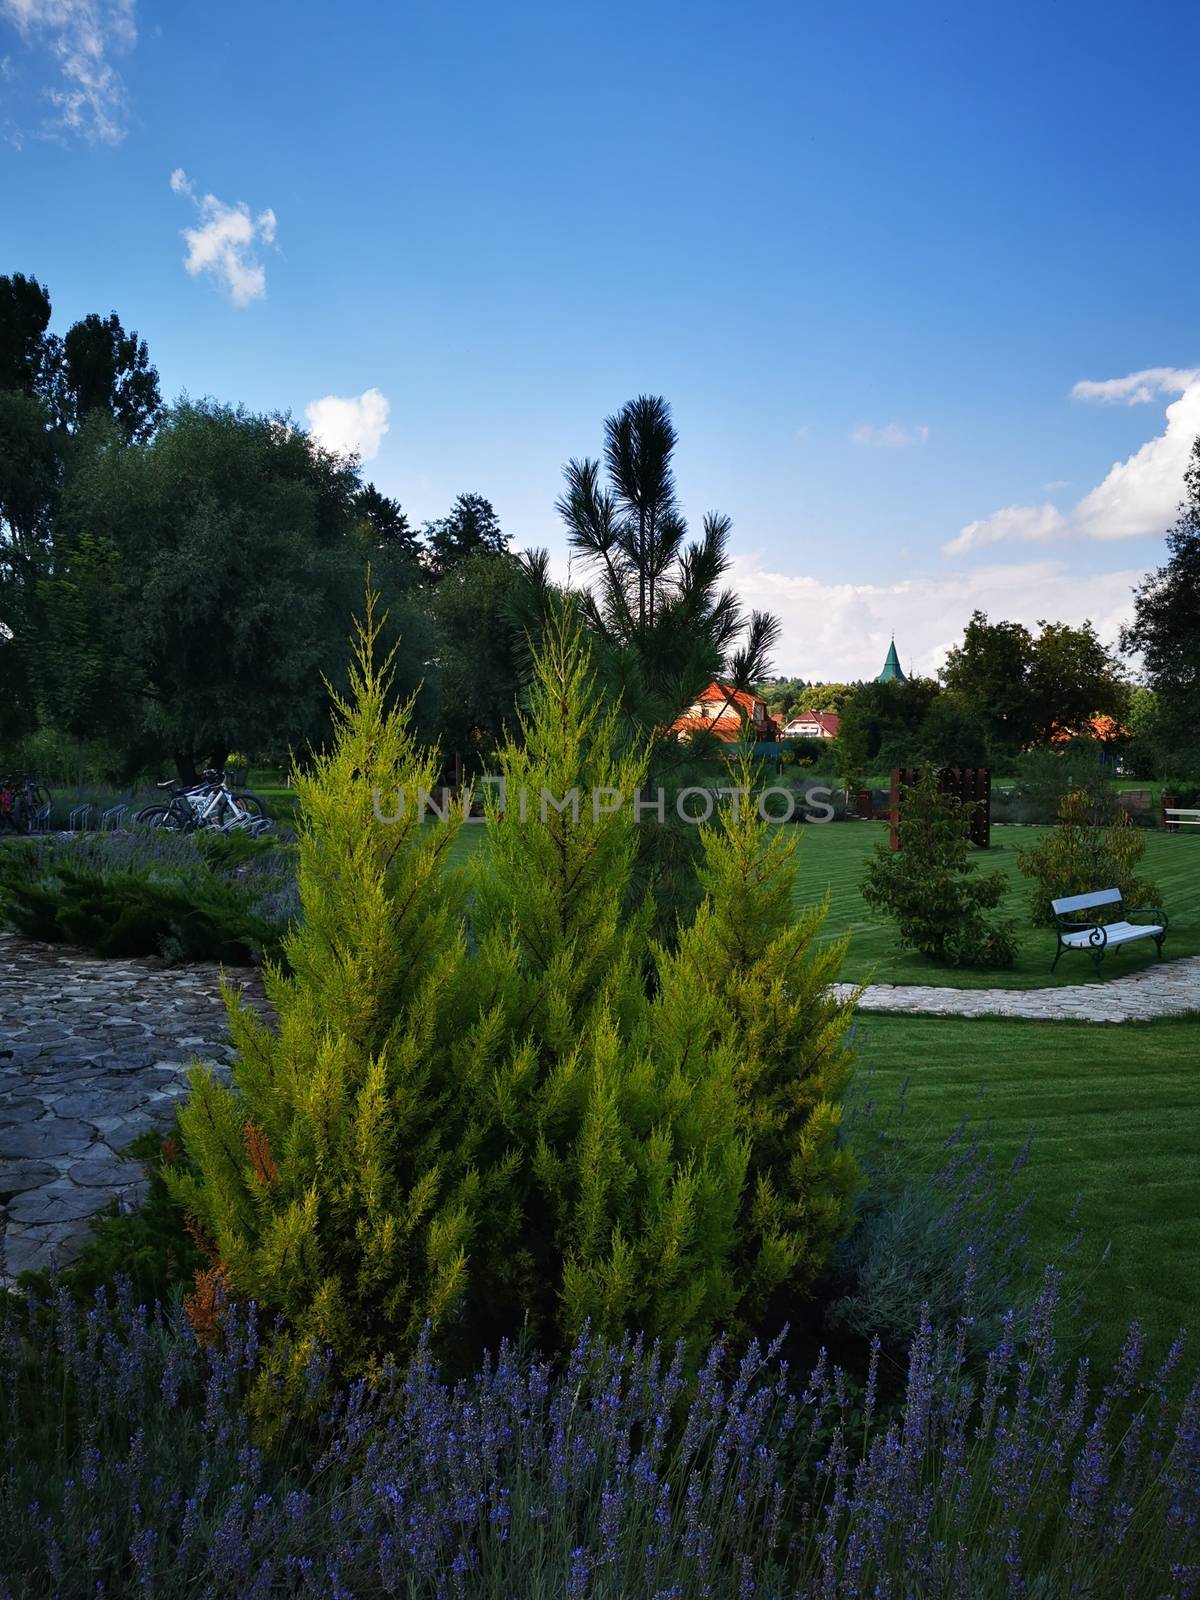 Pine trees and the beautiful nature background in Tündérkert/Miskolc. High quality photo